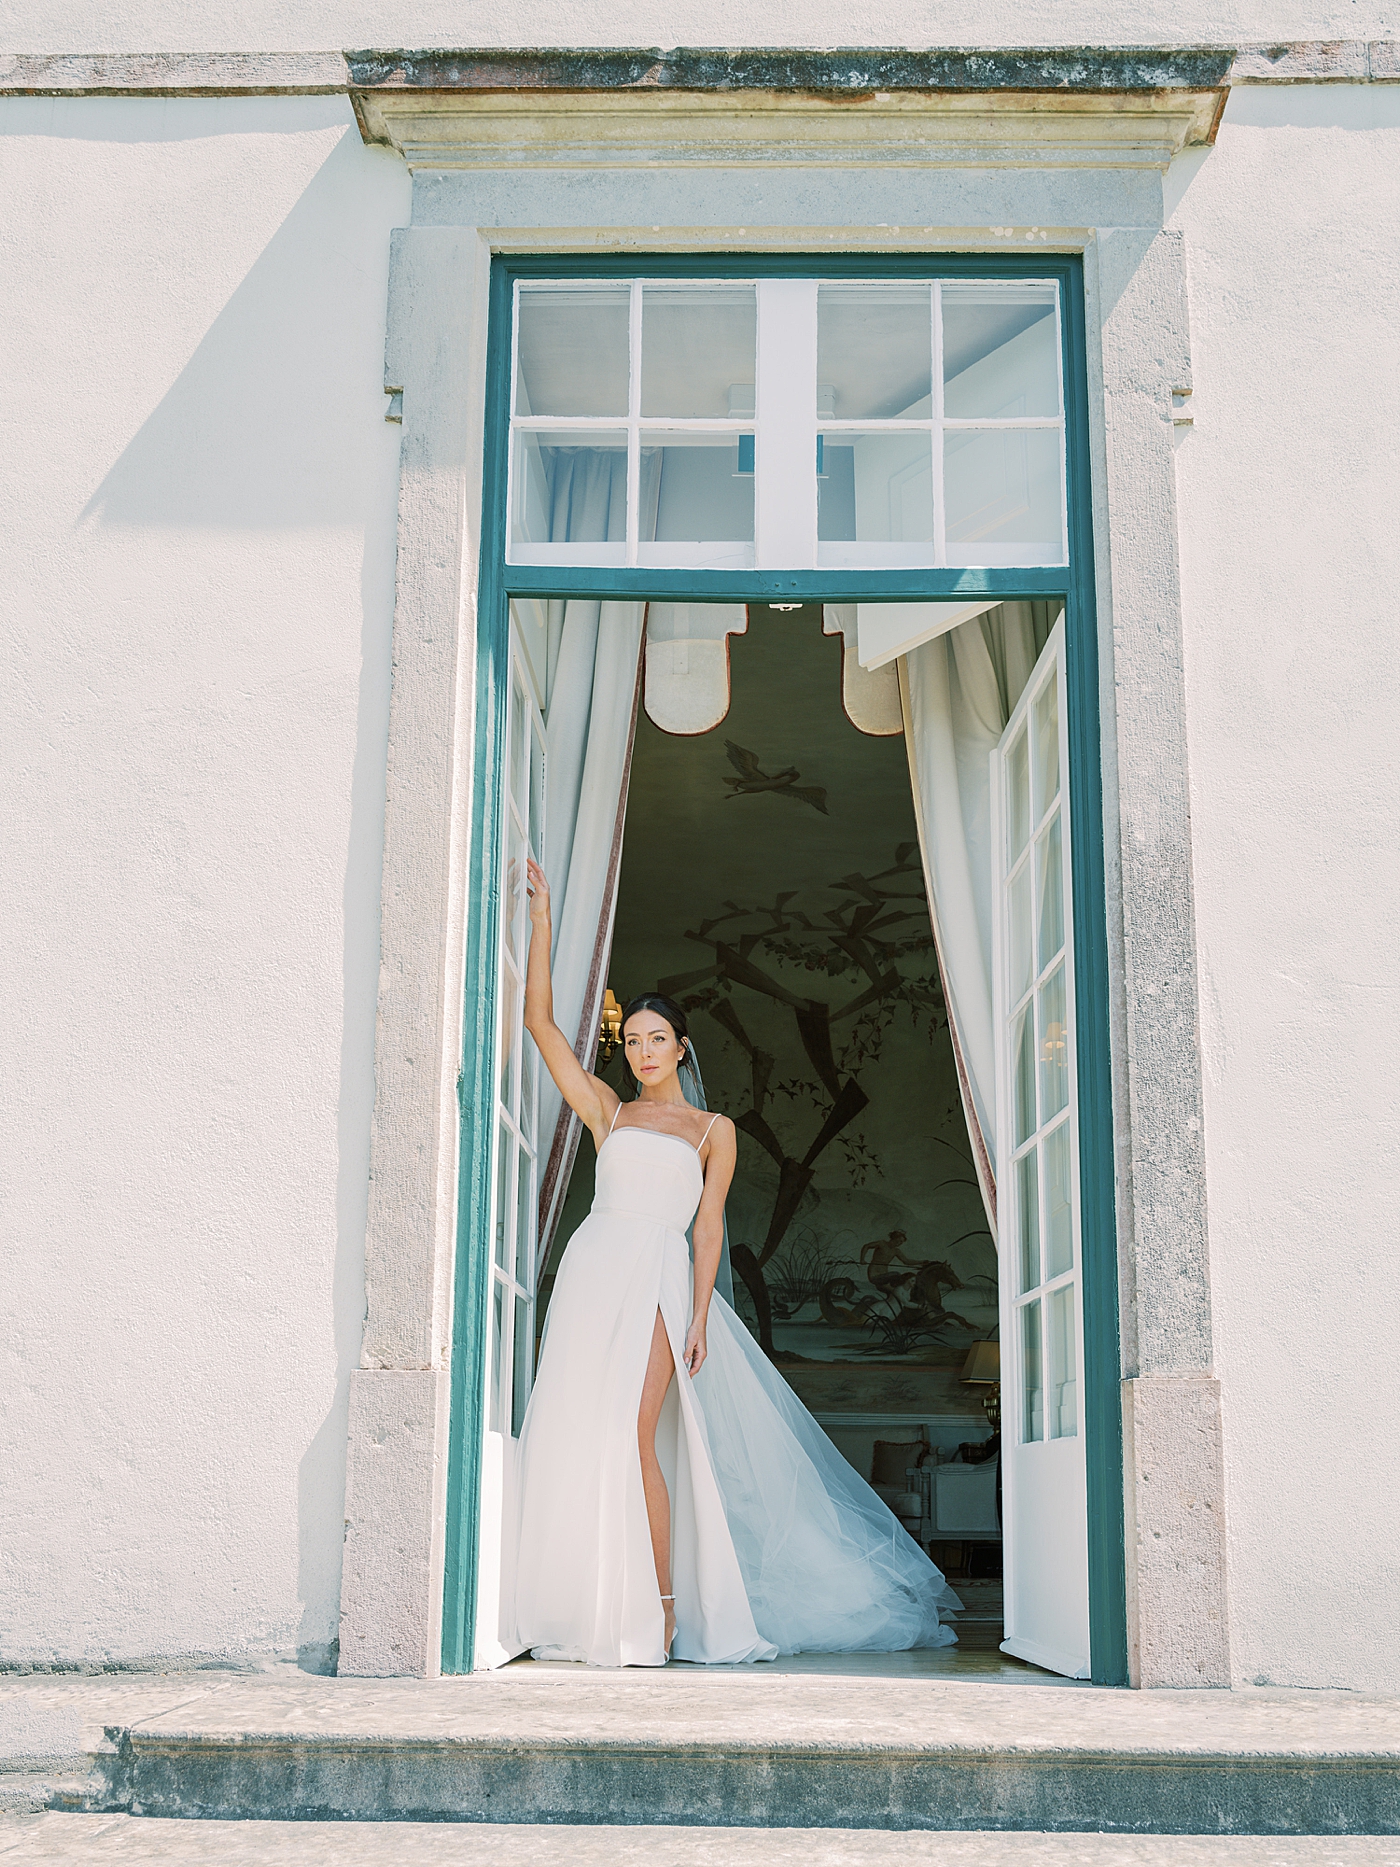 Bride in a doorway | Image by Diane Sotero Photography